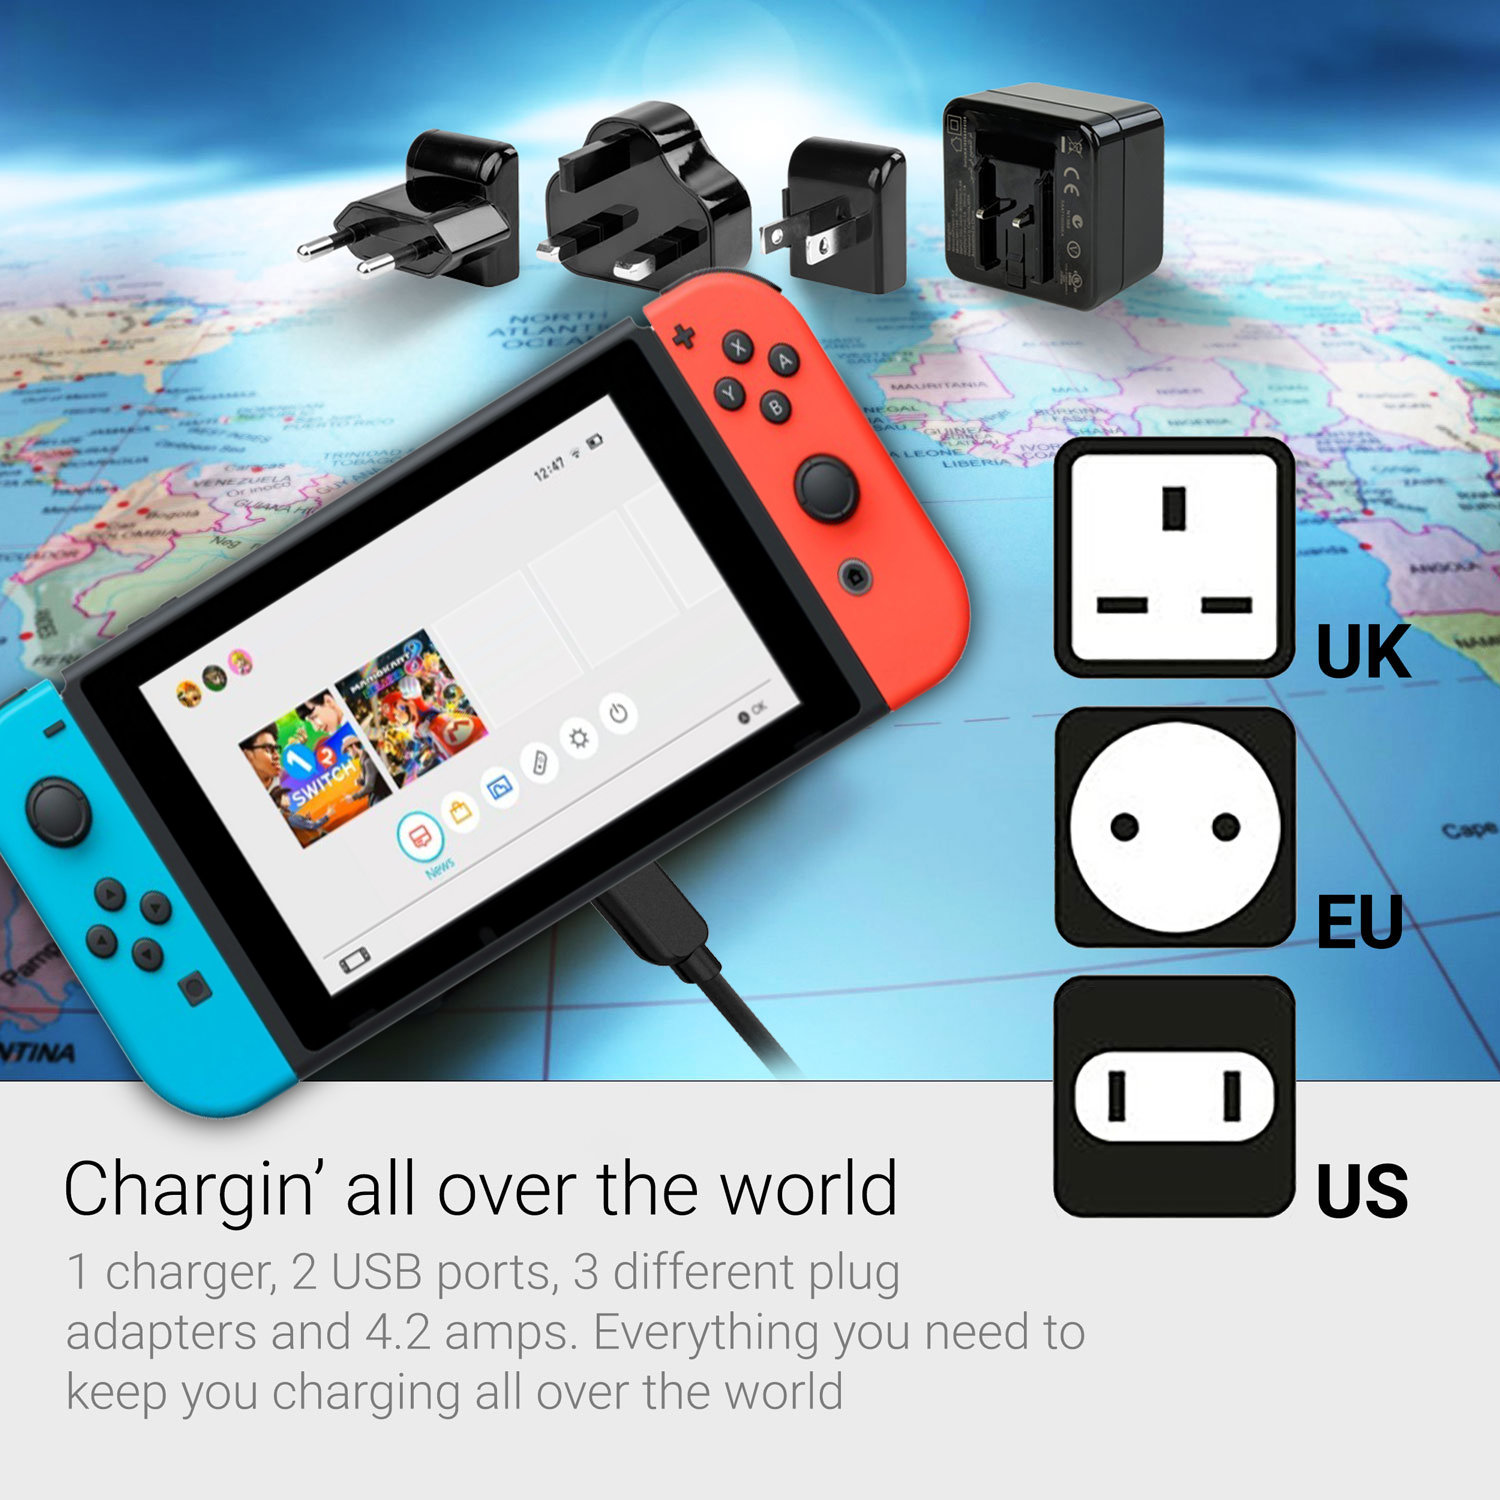 nintendo switch compatible charger